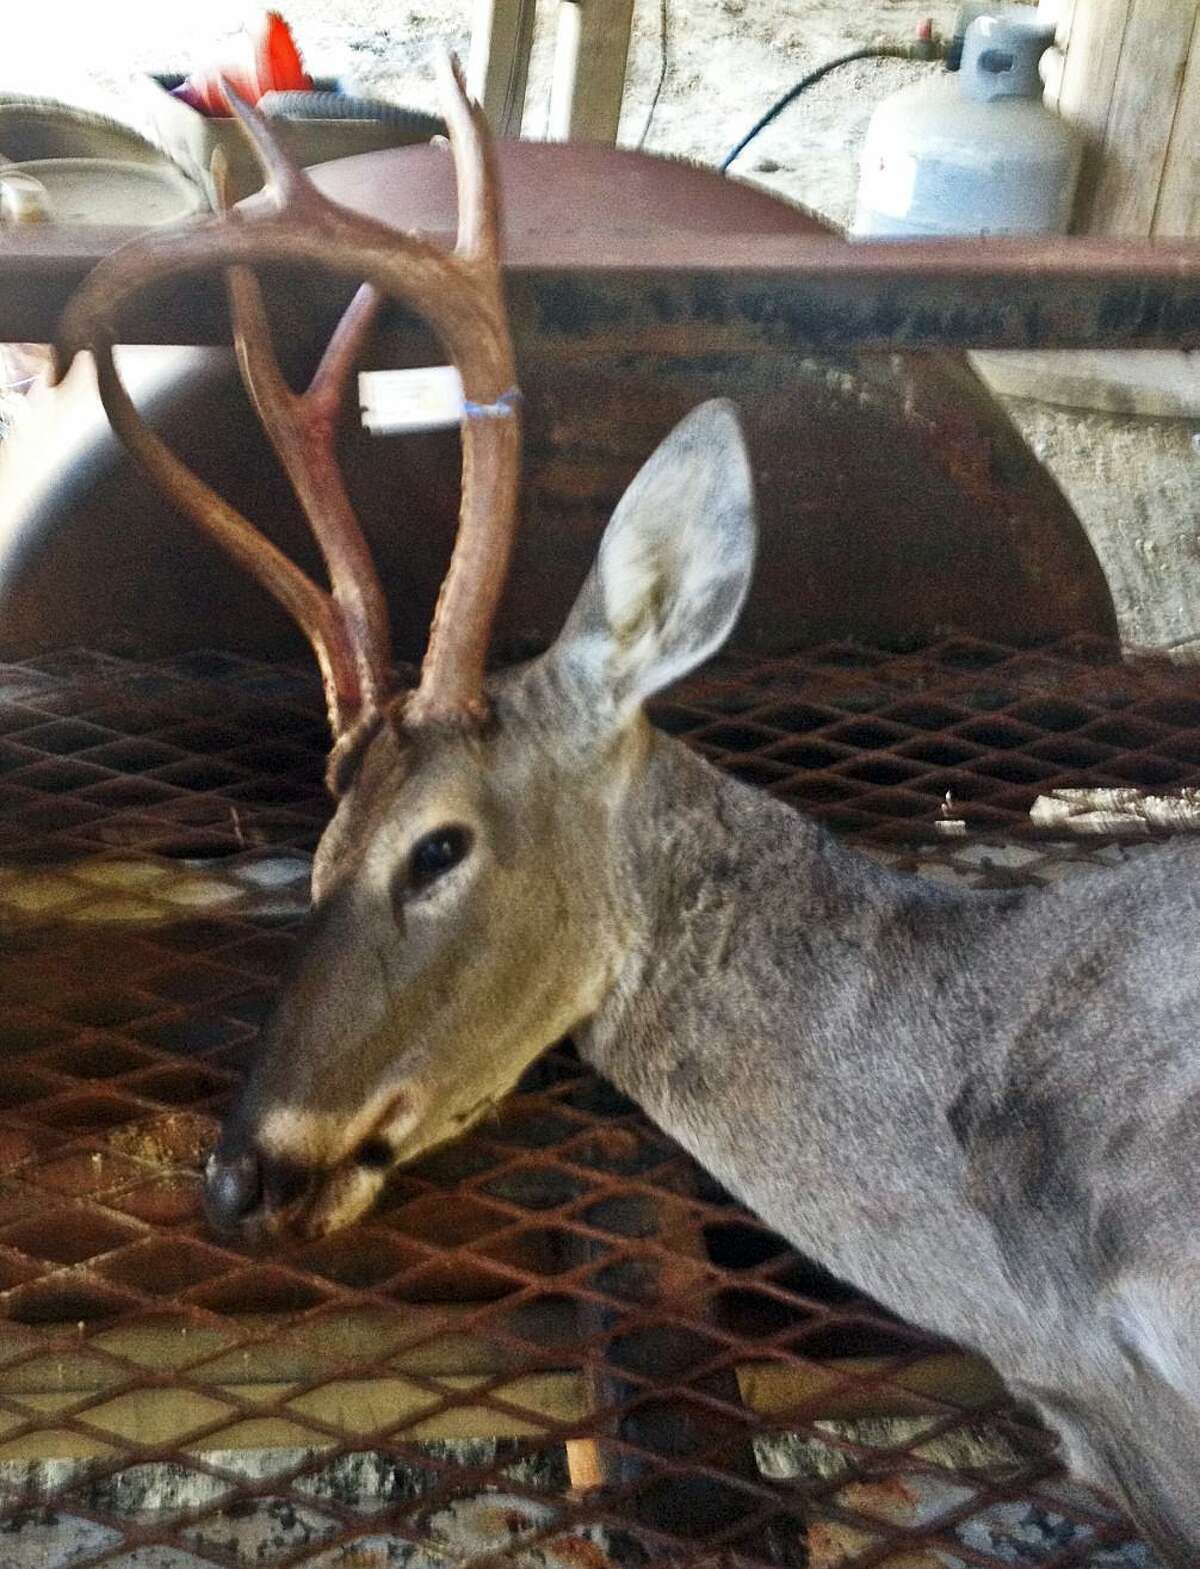 The six-point rack atop the head of this white-tailed deer is nothing to write home about except for the fact that it is a doe sporting these antlers.